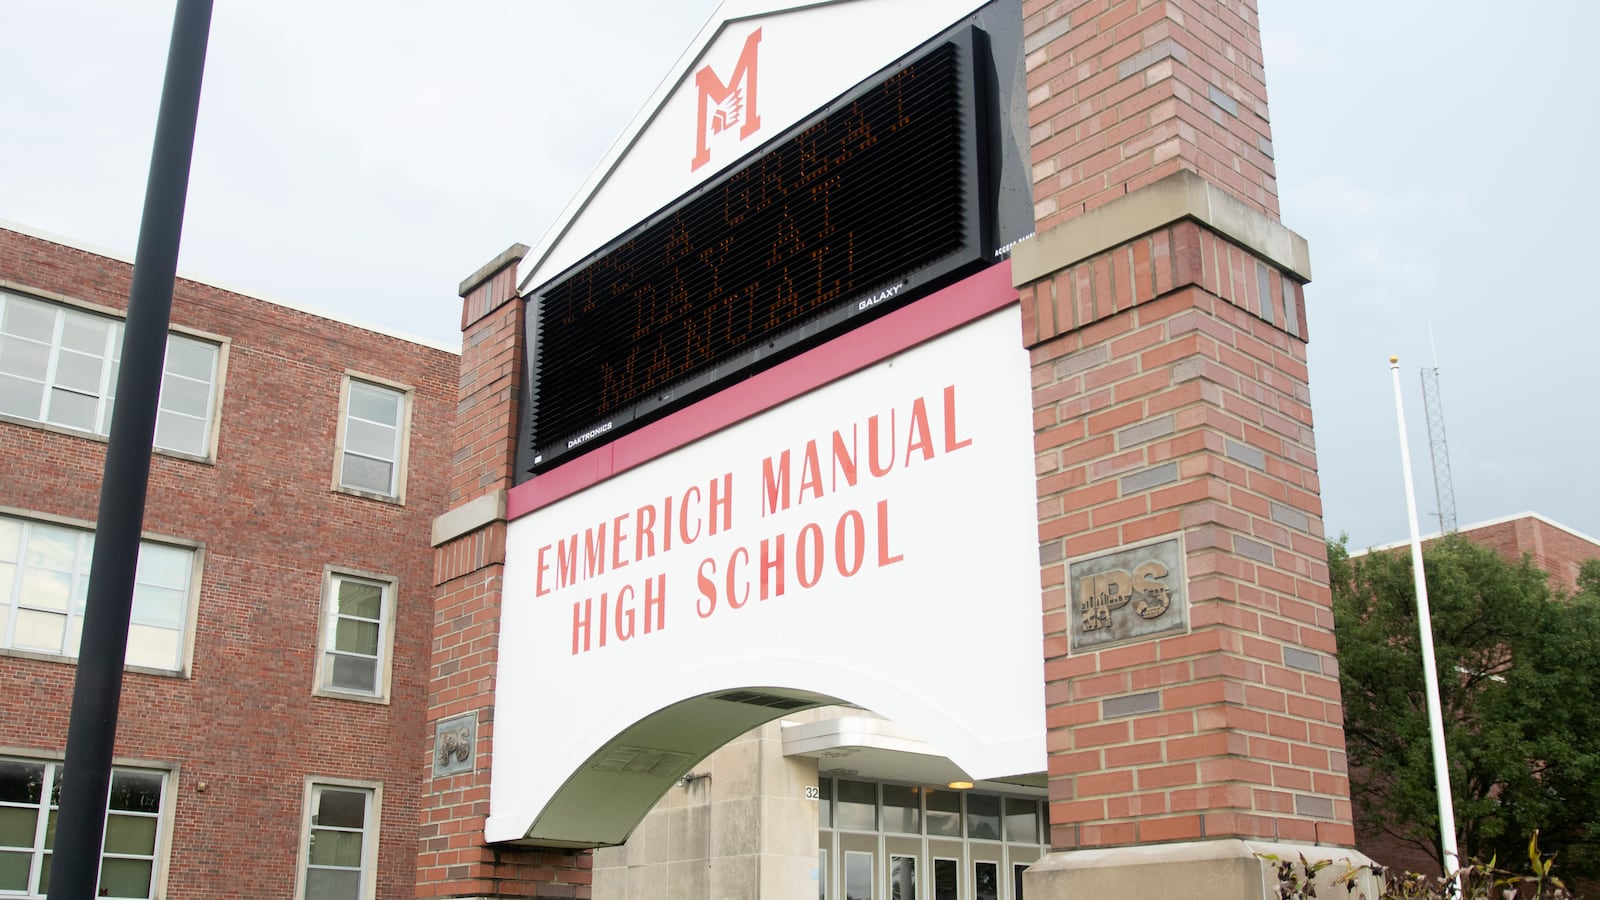 Emmerich Manual High School in Indianapolis